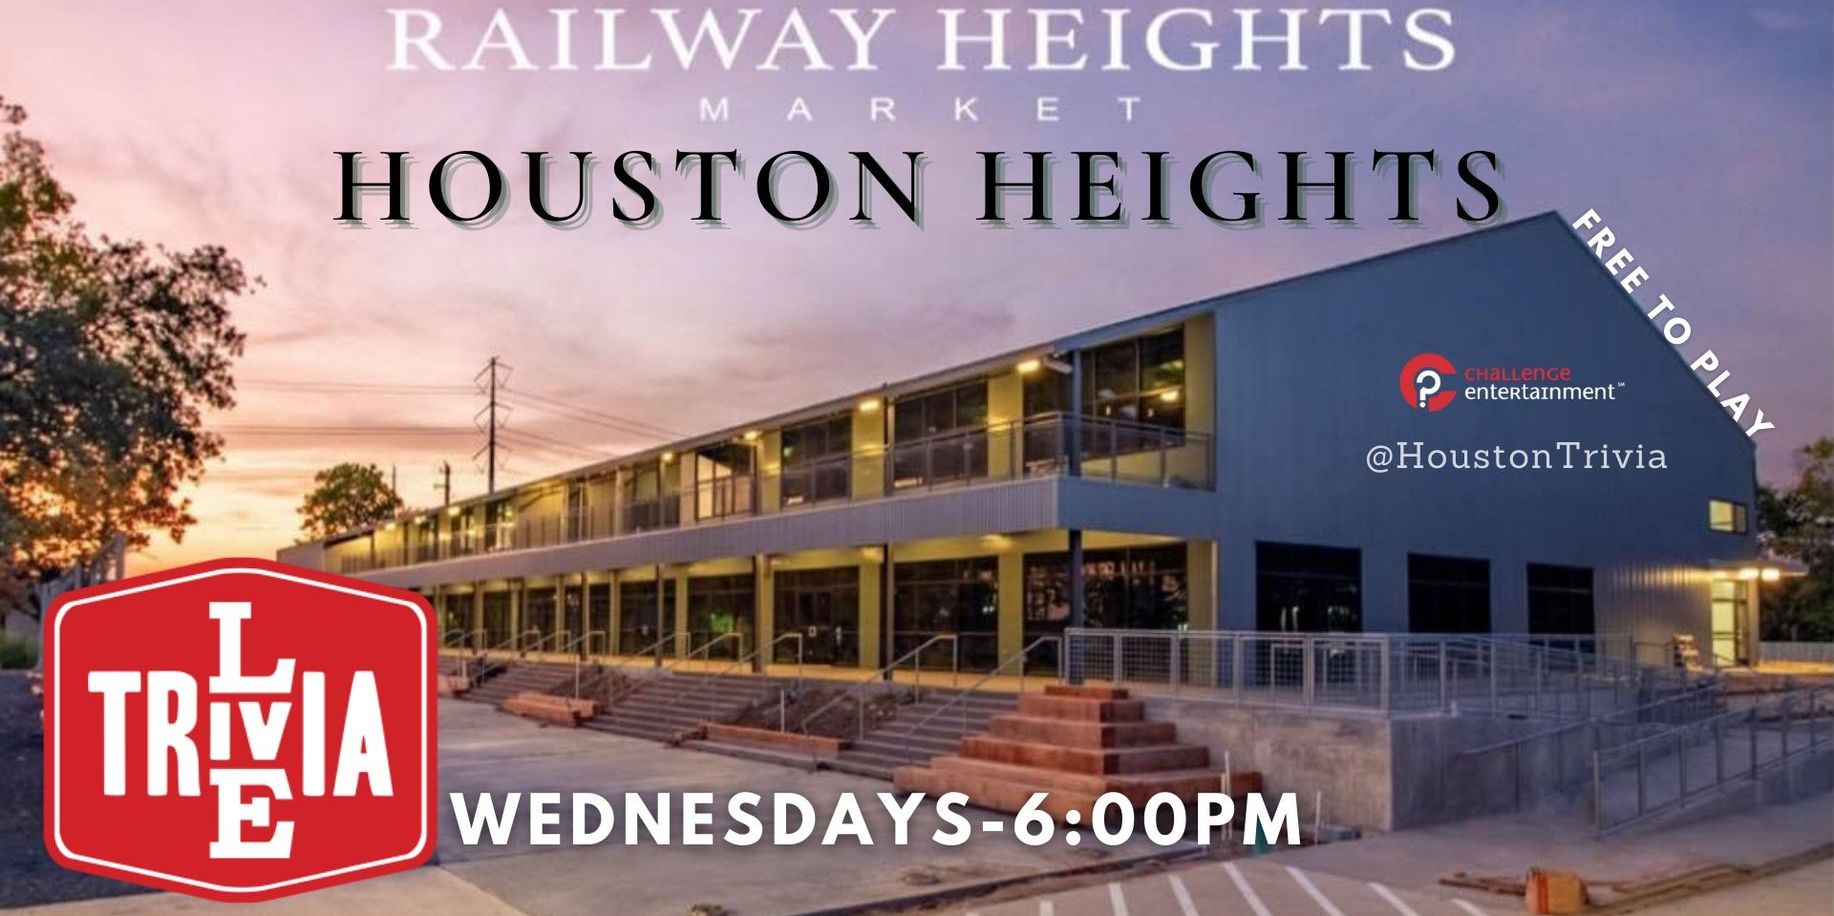 Live Trivia at Railway Heights Market promotional image